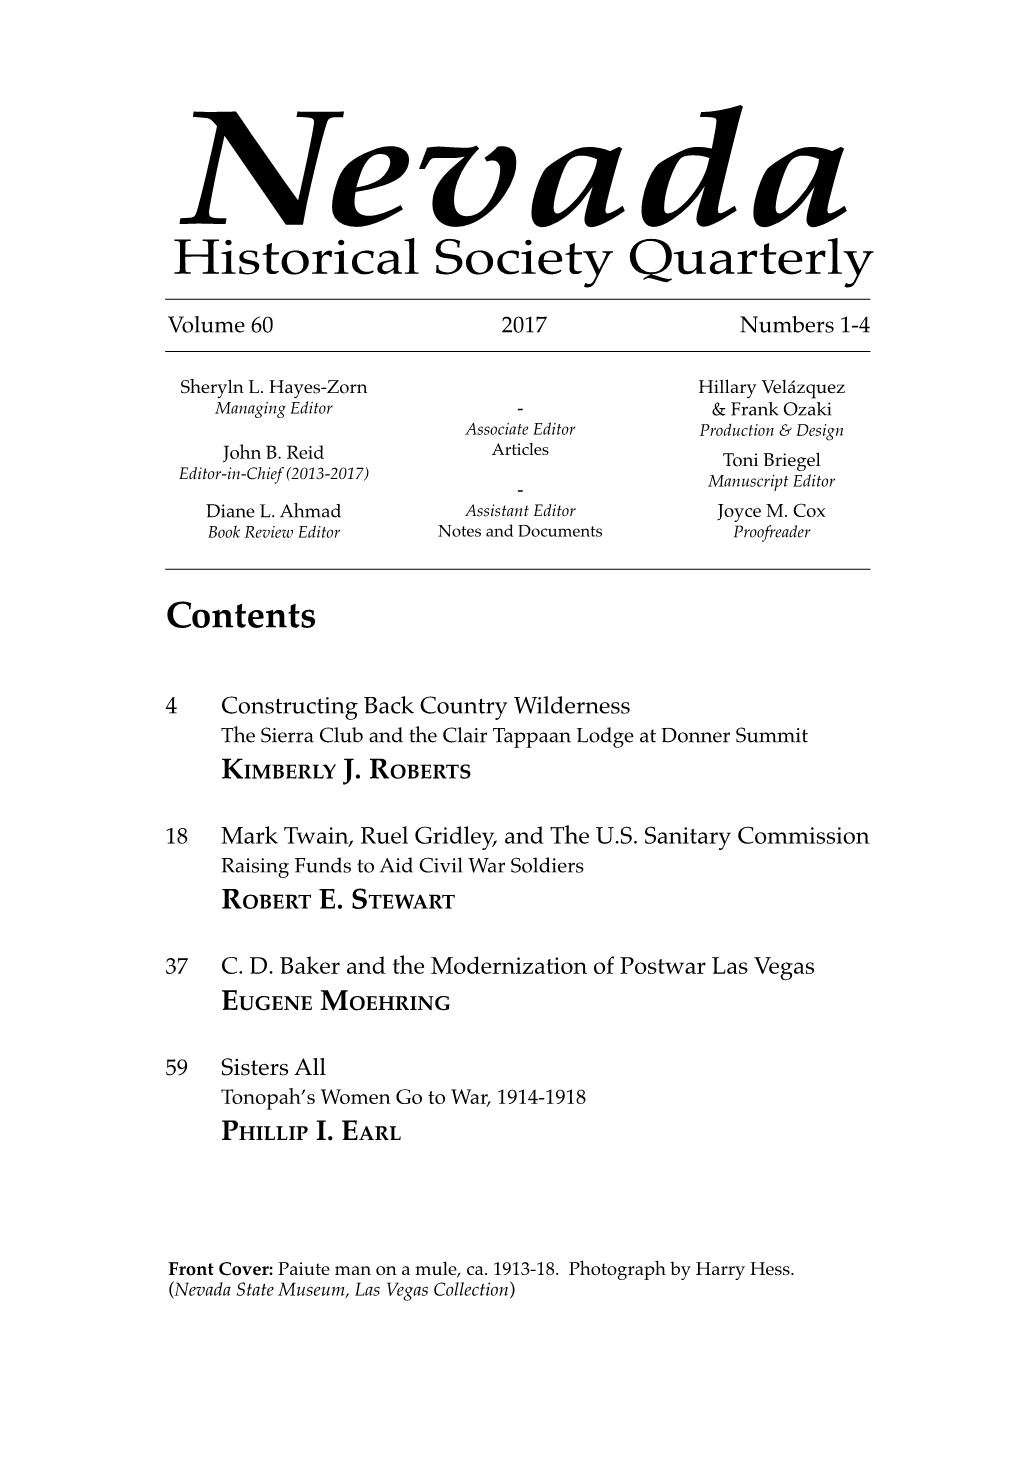 Historical Society Quarterly Will Begin to Feature More Book Reviews